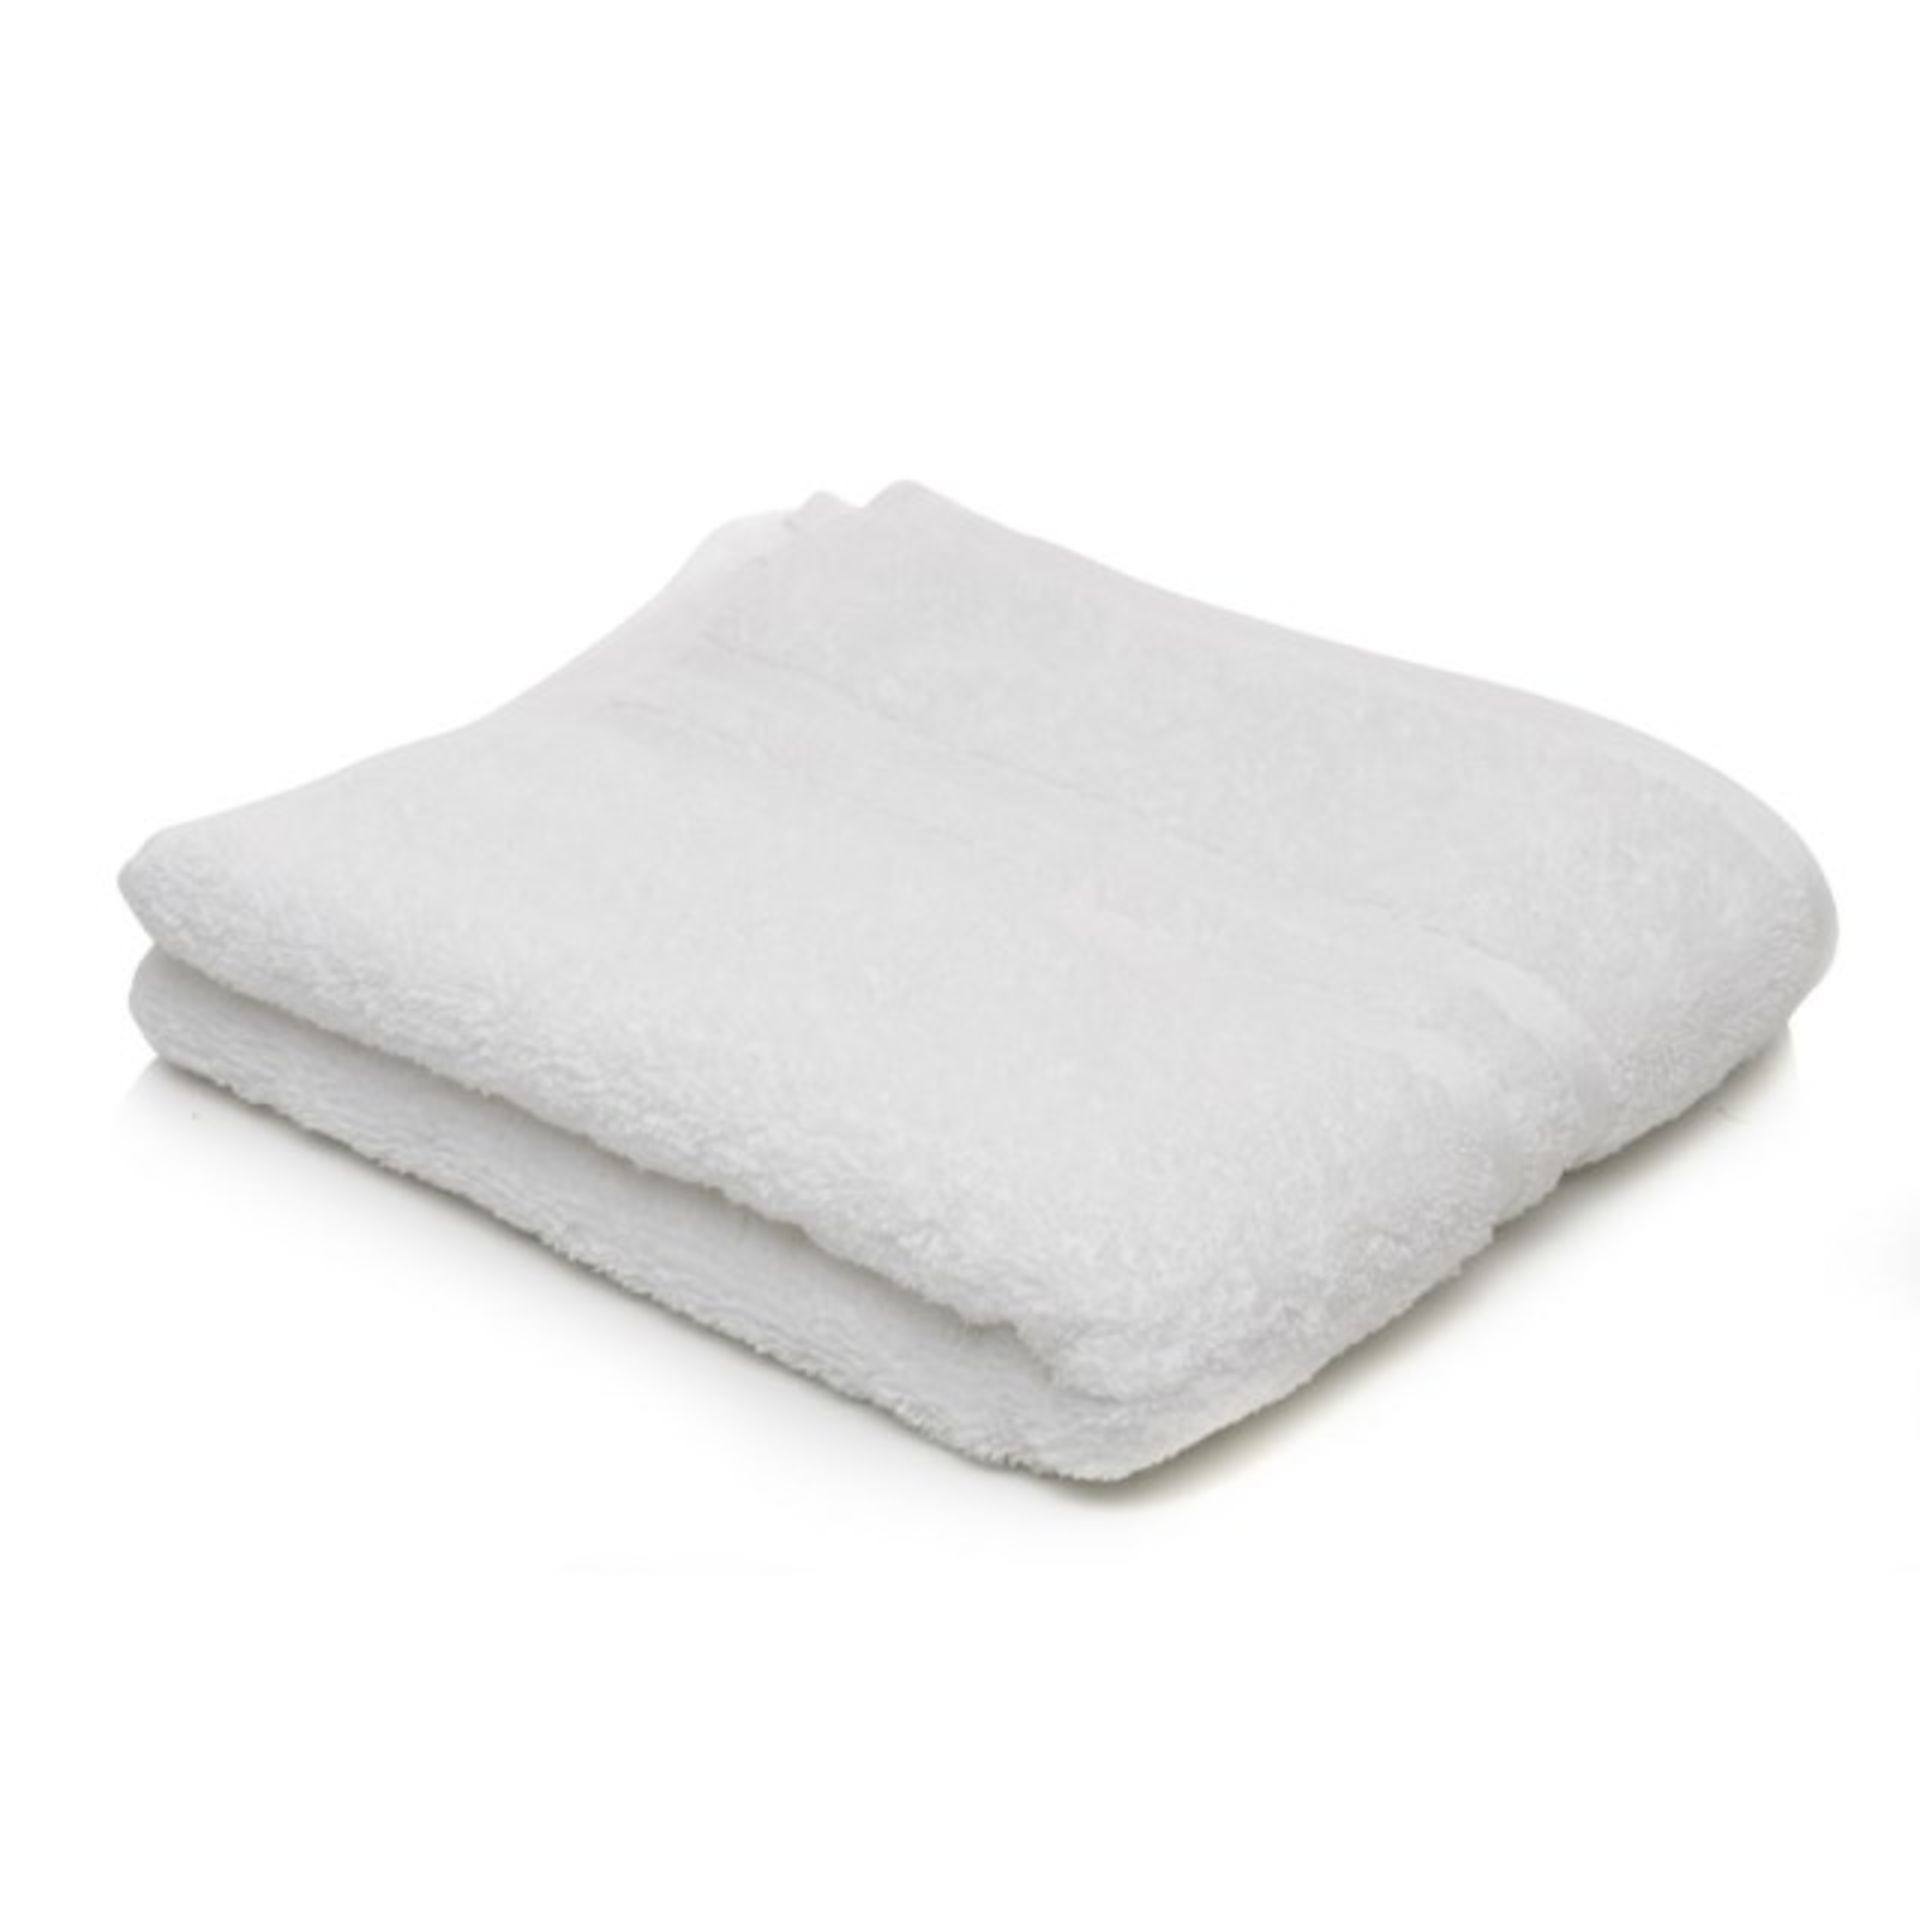 V *TRADE QTY* Brand New Hotel Quality Large Cotton Bath Sheet X 12 YOUR BID PRICE TO BE MULTIPLIED